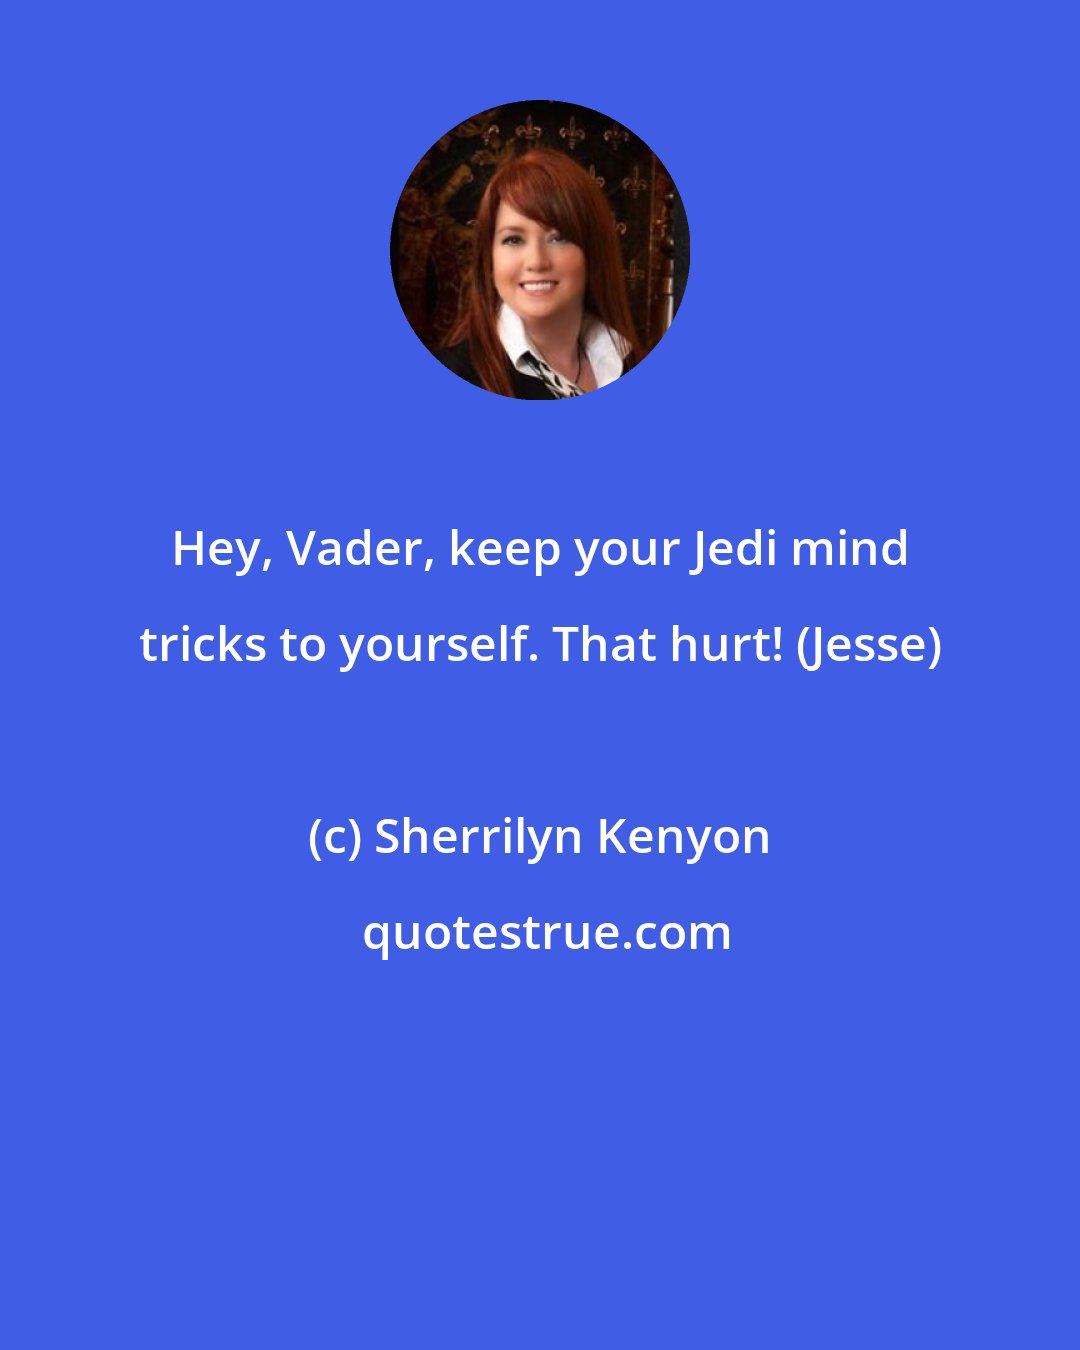 Sherrilyn Kenyon: Hey, Vader, keep your Jedi mind tricks to yourself. That hurt! (Jesse)